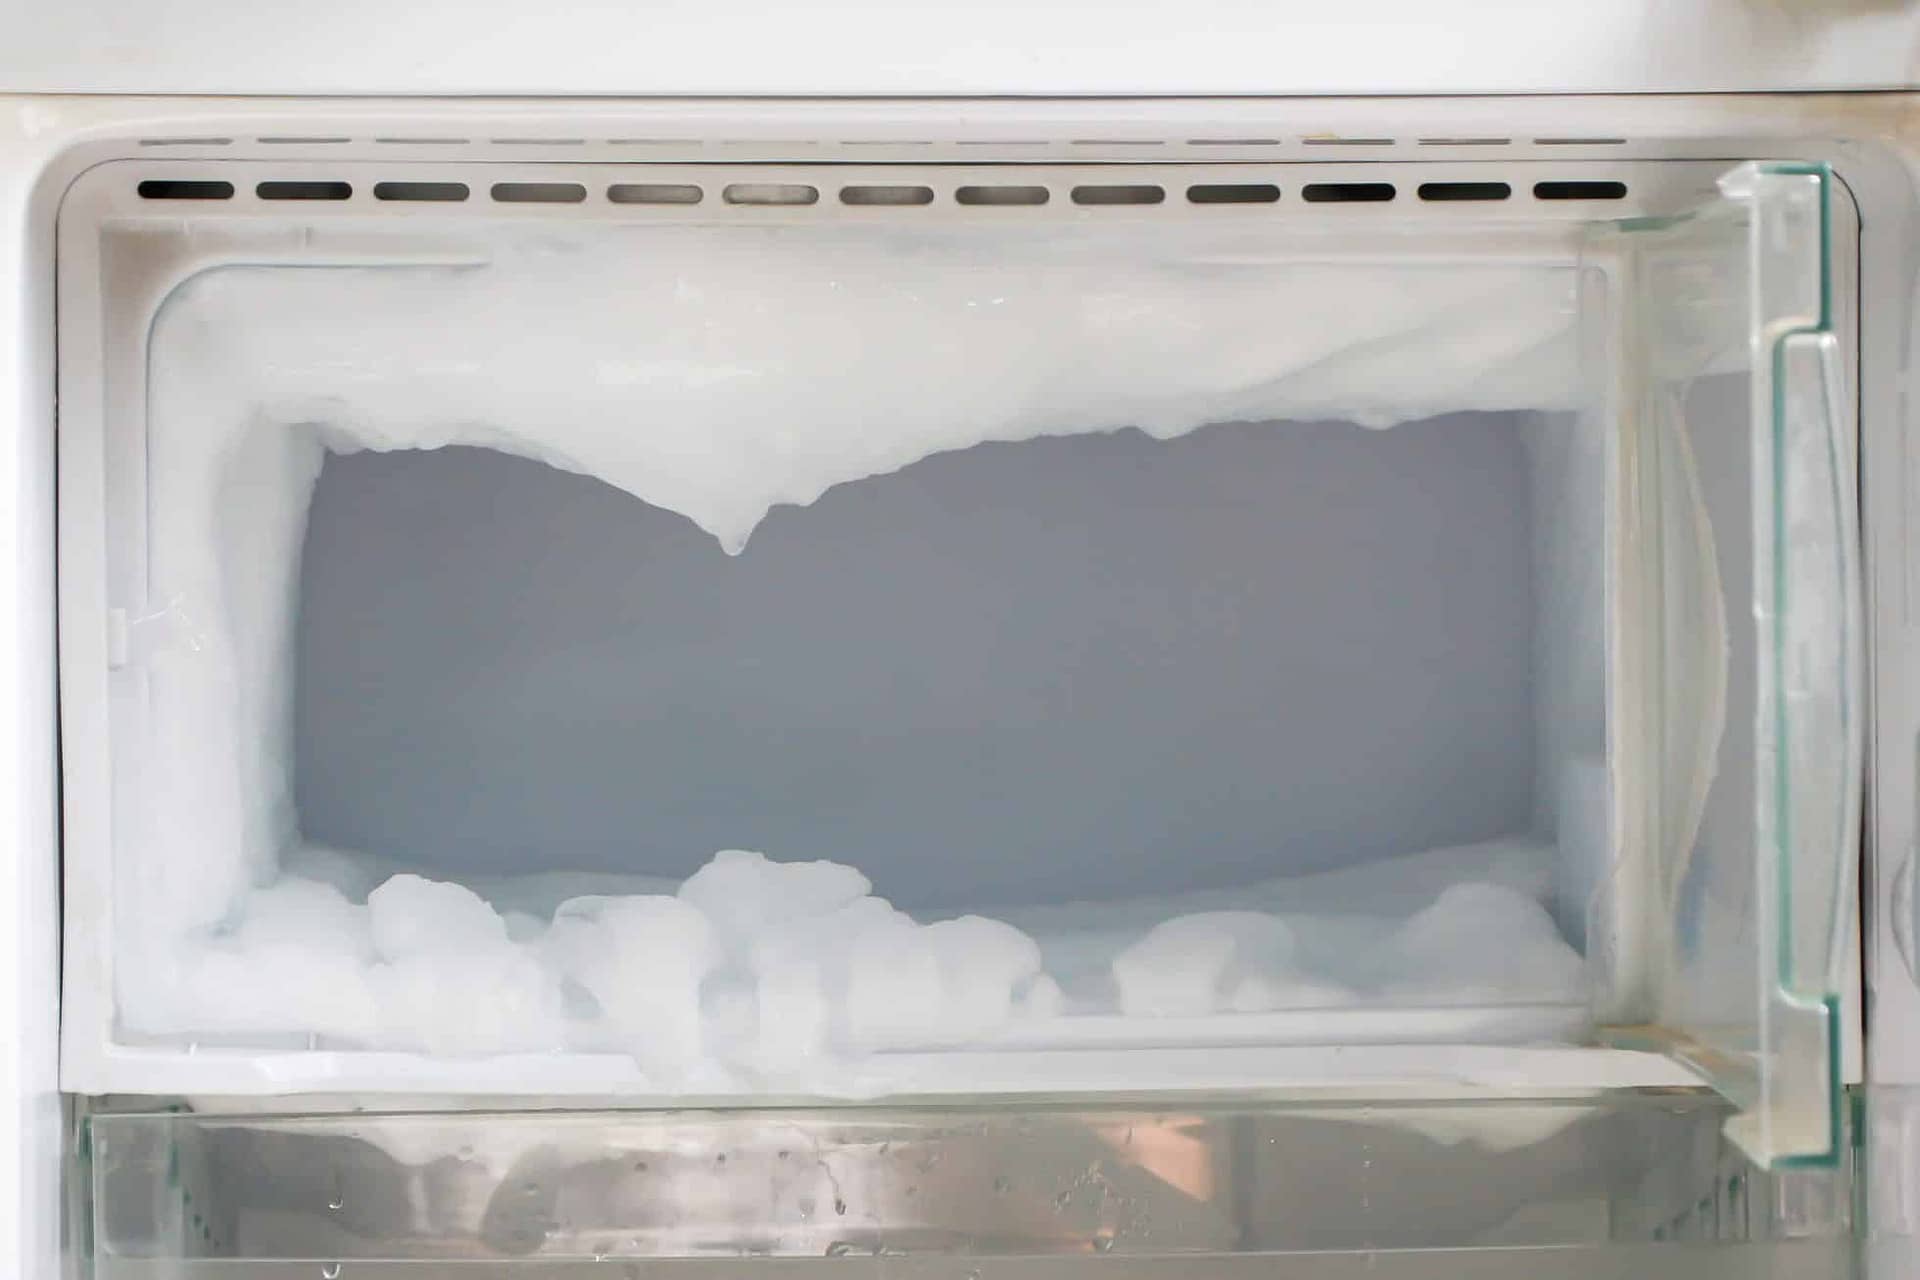 How To Prevent Ice Buildup In Freezer: Step-By-Step Guide